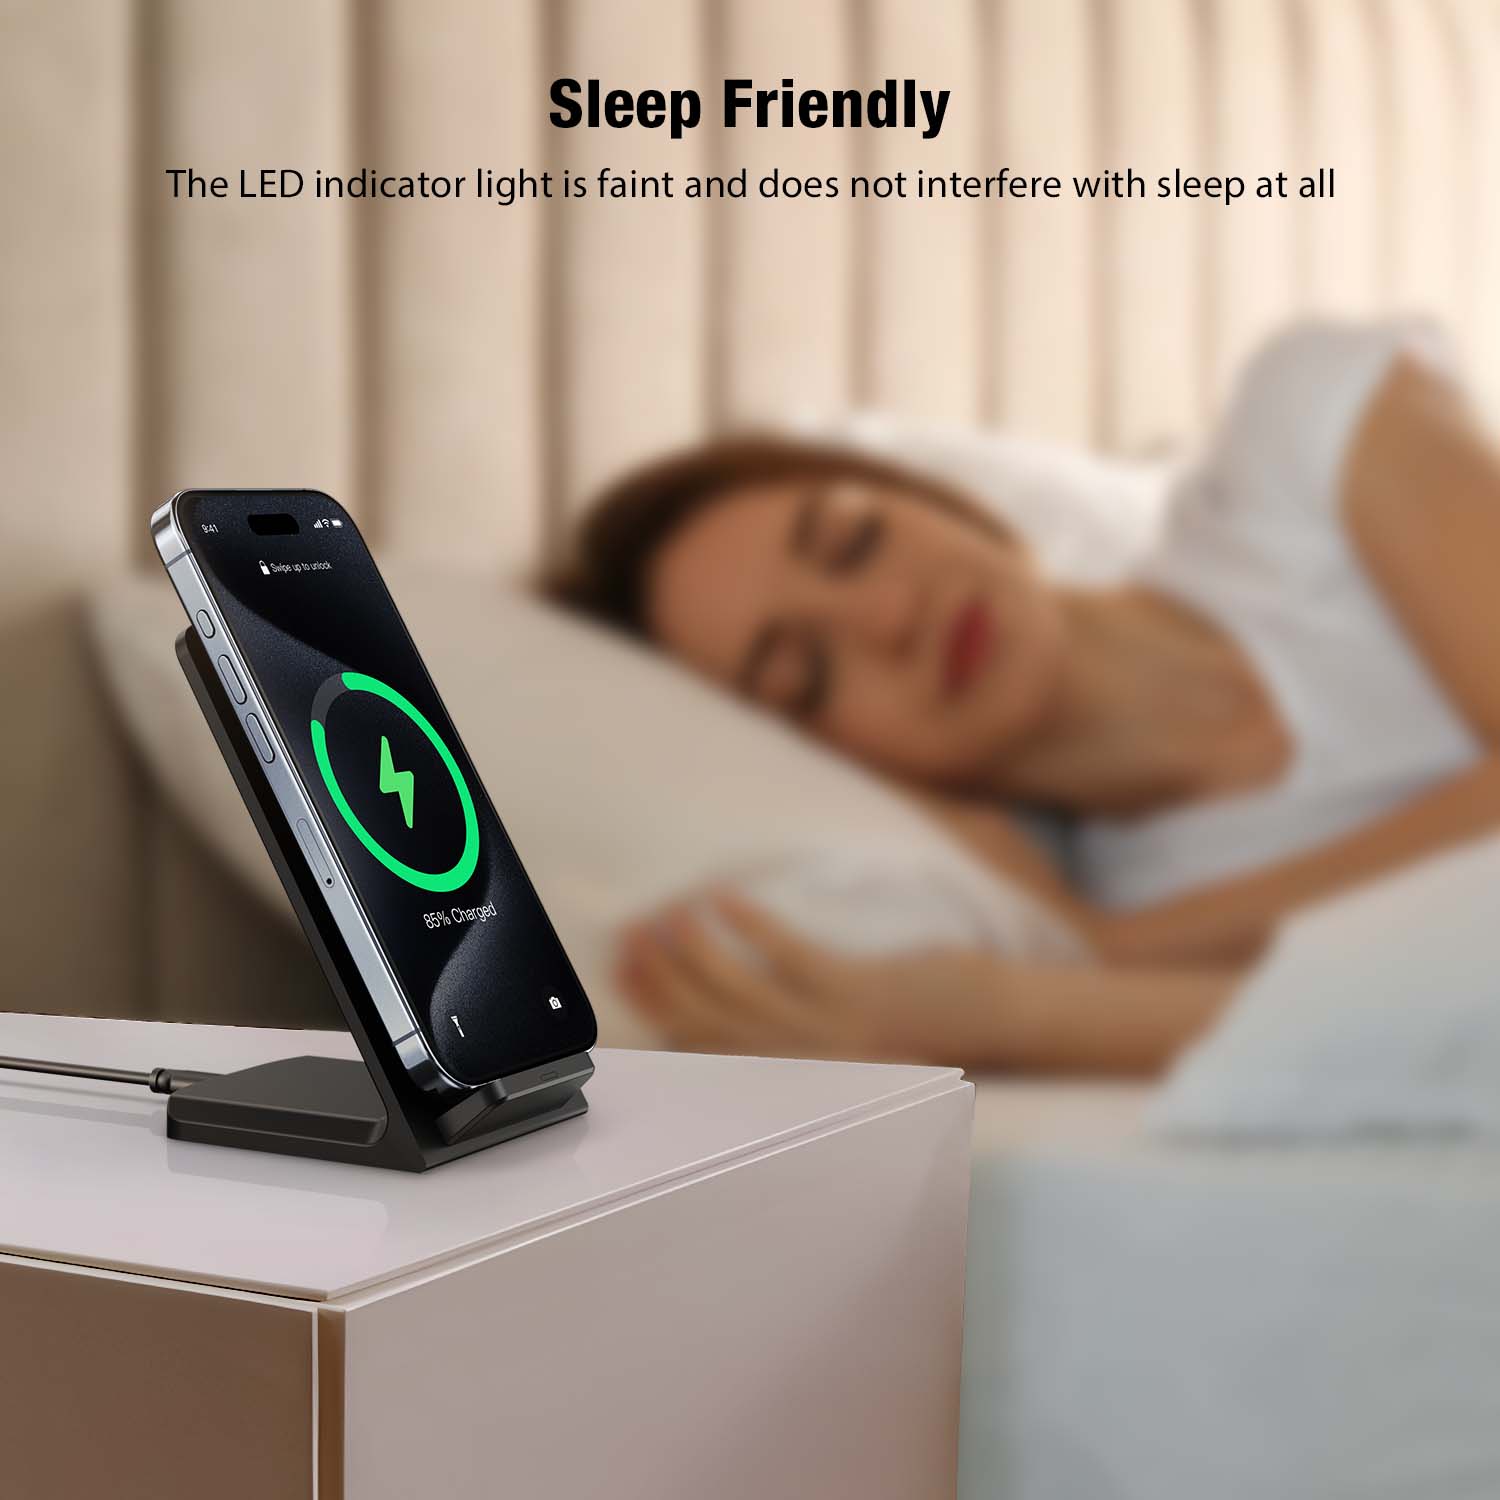 Wireless Charger Stand Station for Apple iPhone & Samsung